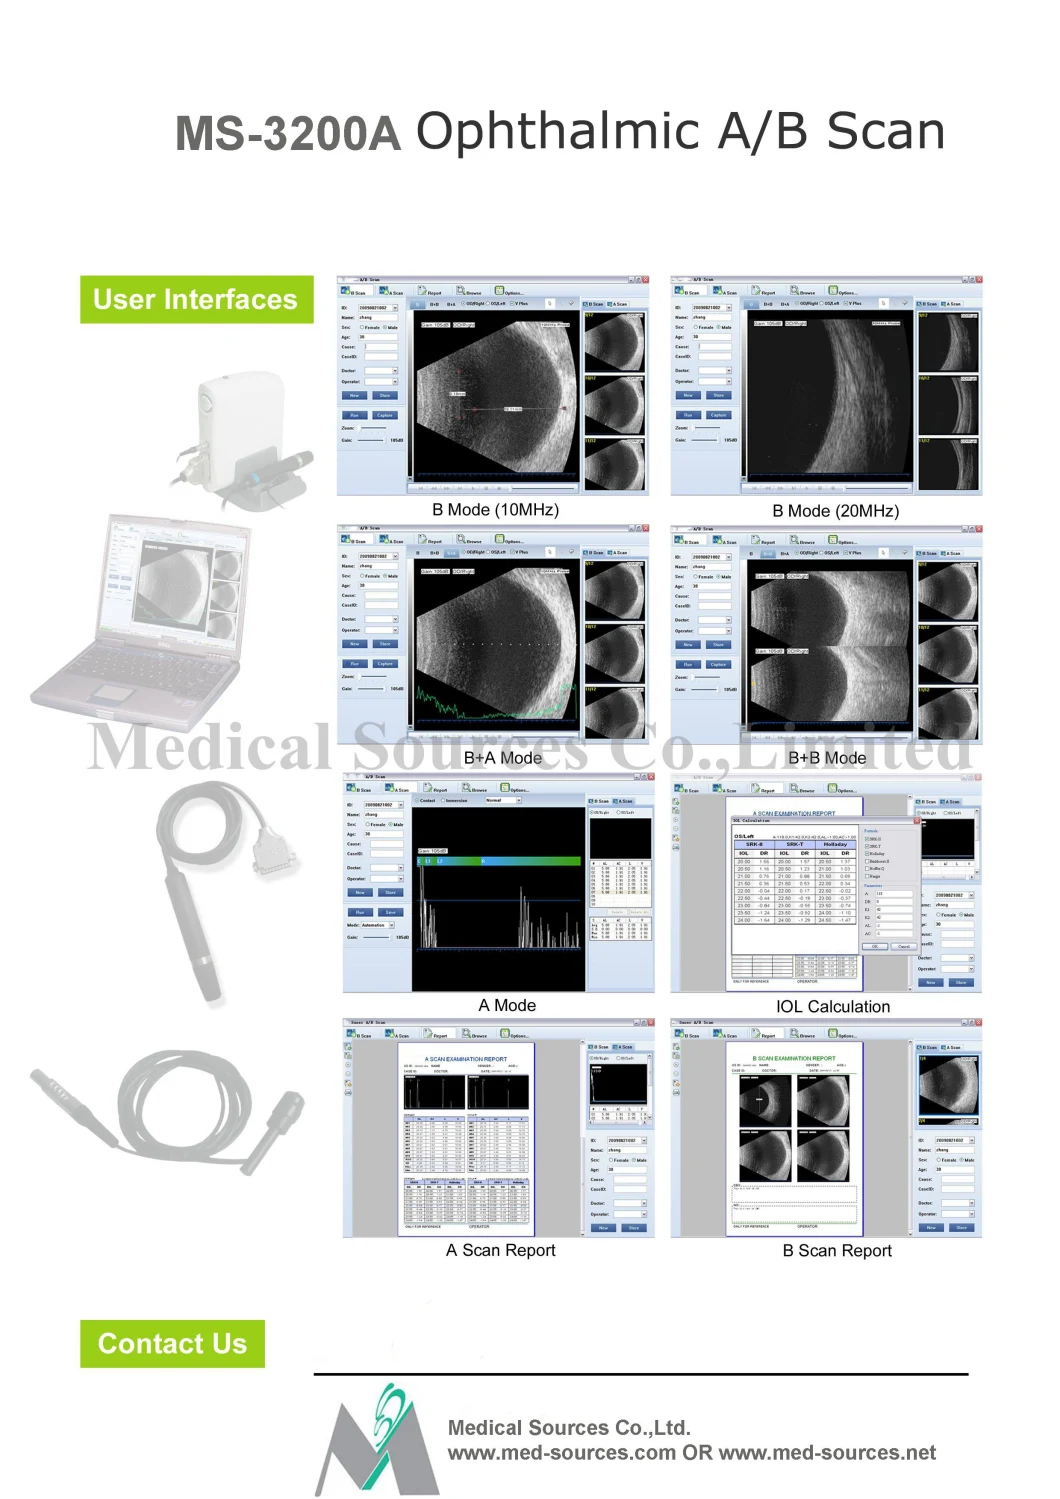 Ms-3200A a/B Biometer Phachymeter Ophthalmic Ophthalmology Ultrasound Scanner Scan